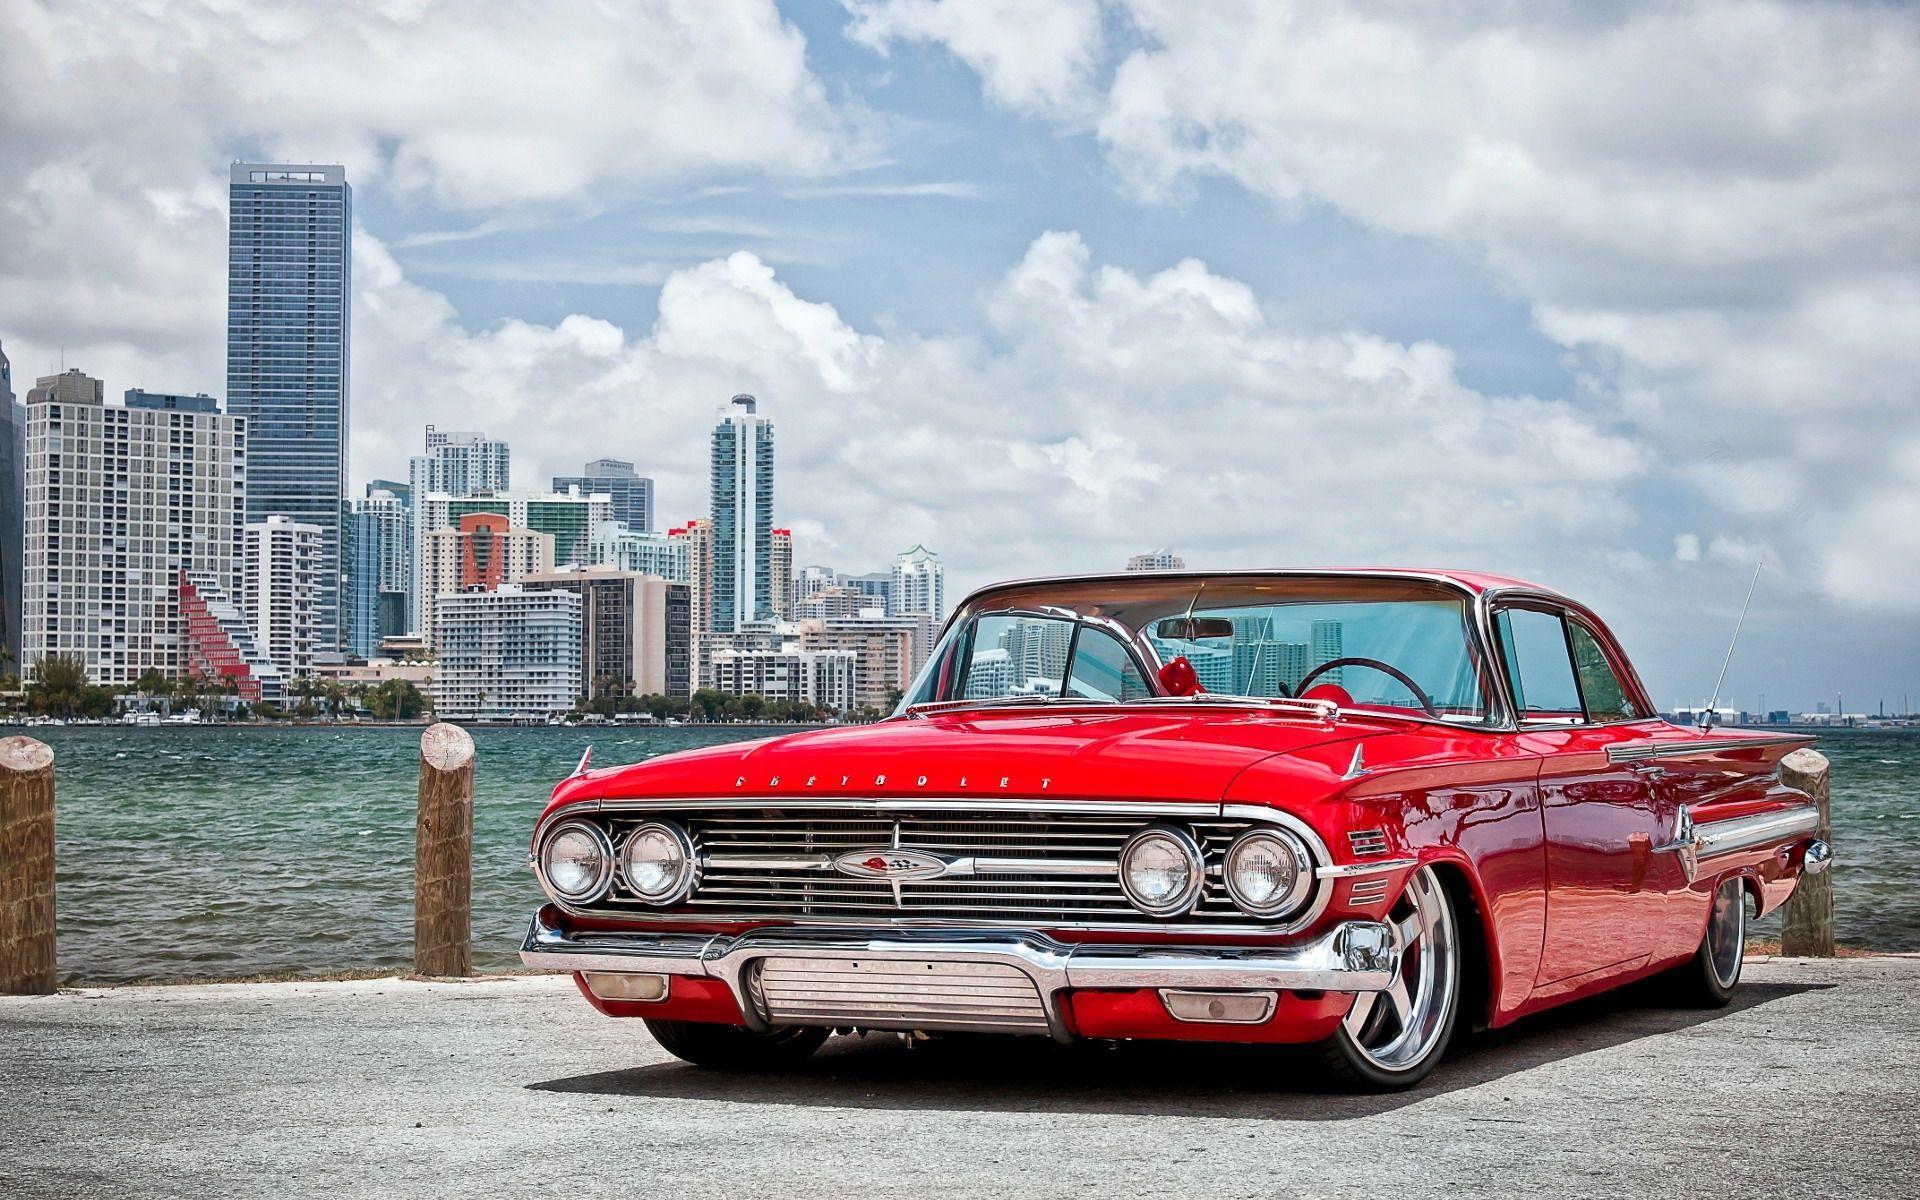 Chevrolet 1960 chevyred tuning low retro hot rod wallpaper